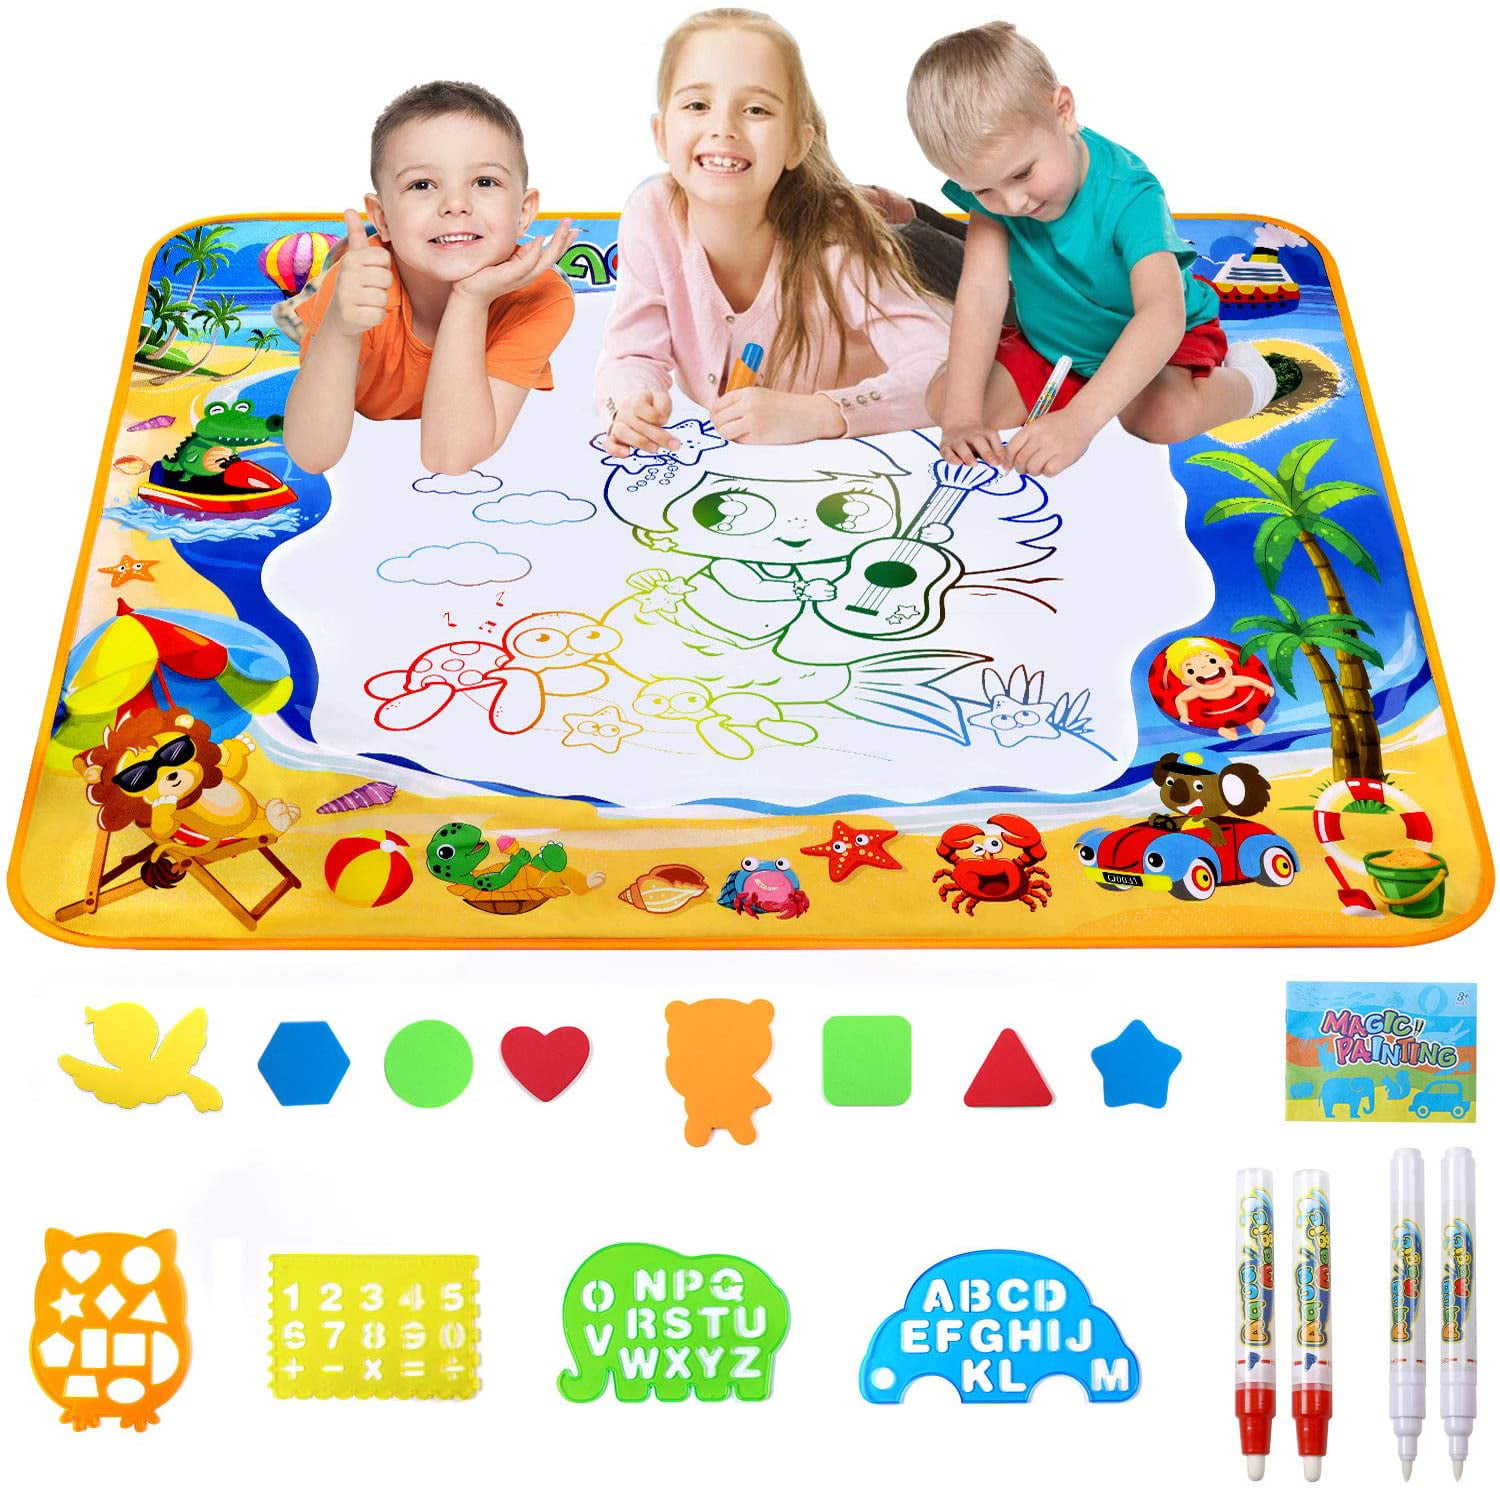 4 Color Painting Mat Board Doodle Kids Learning Education Toy Water Drawing Gift 